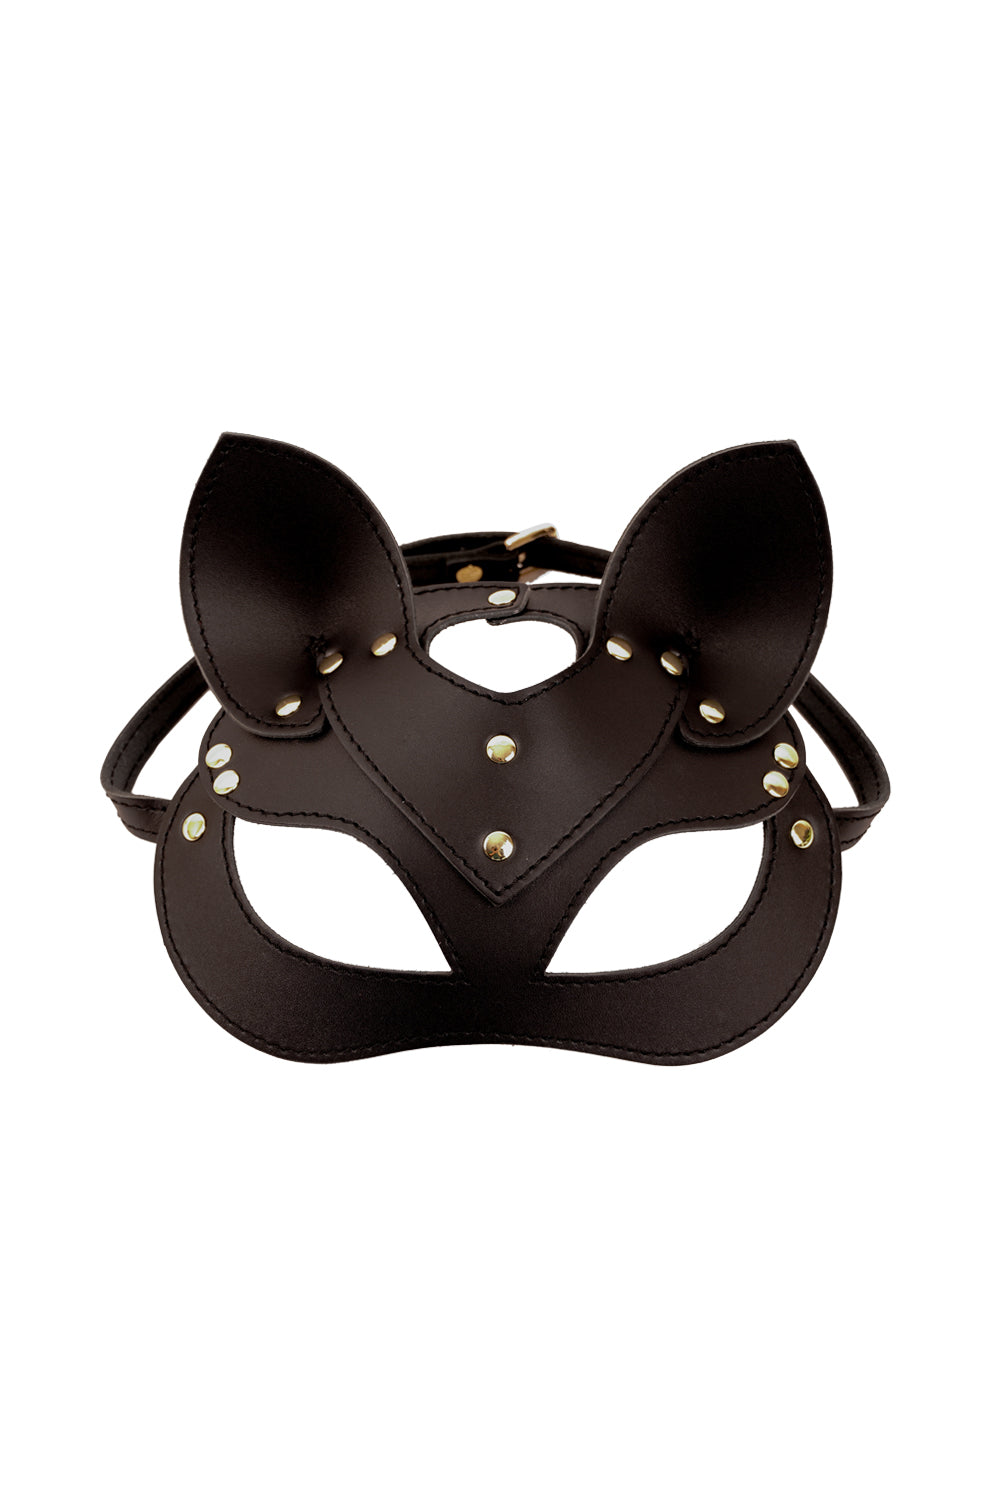 Leather сat mask, kitty fetish mask. Green